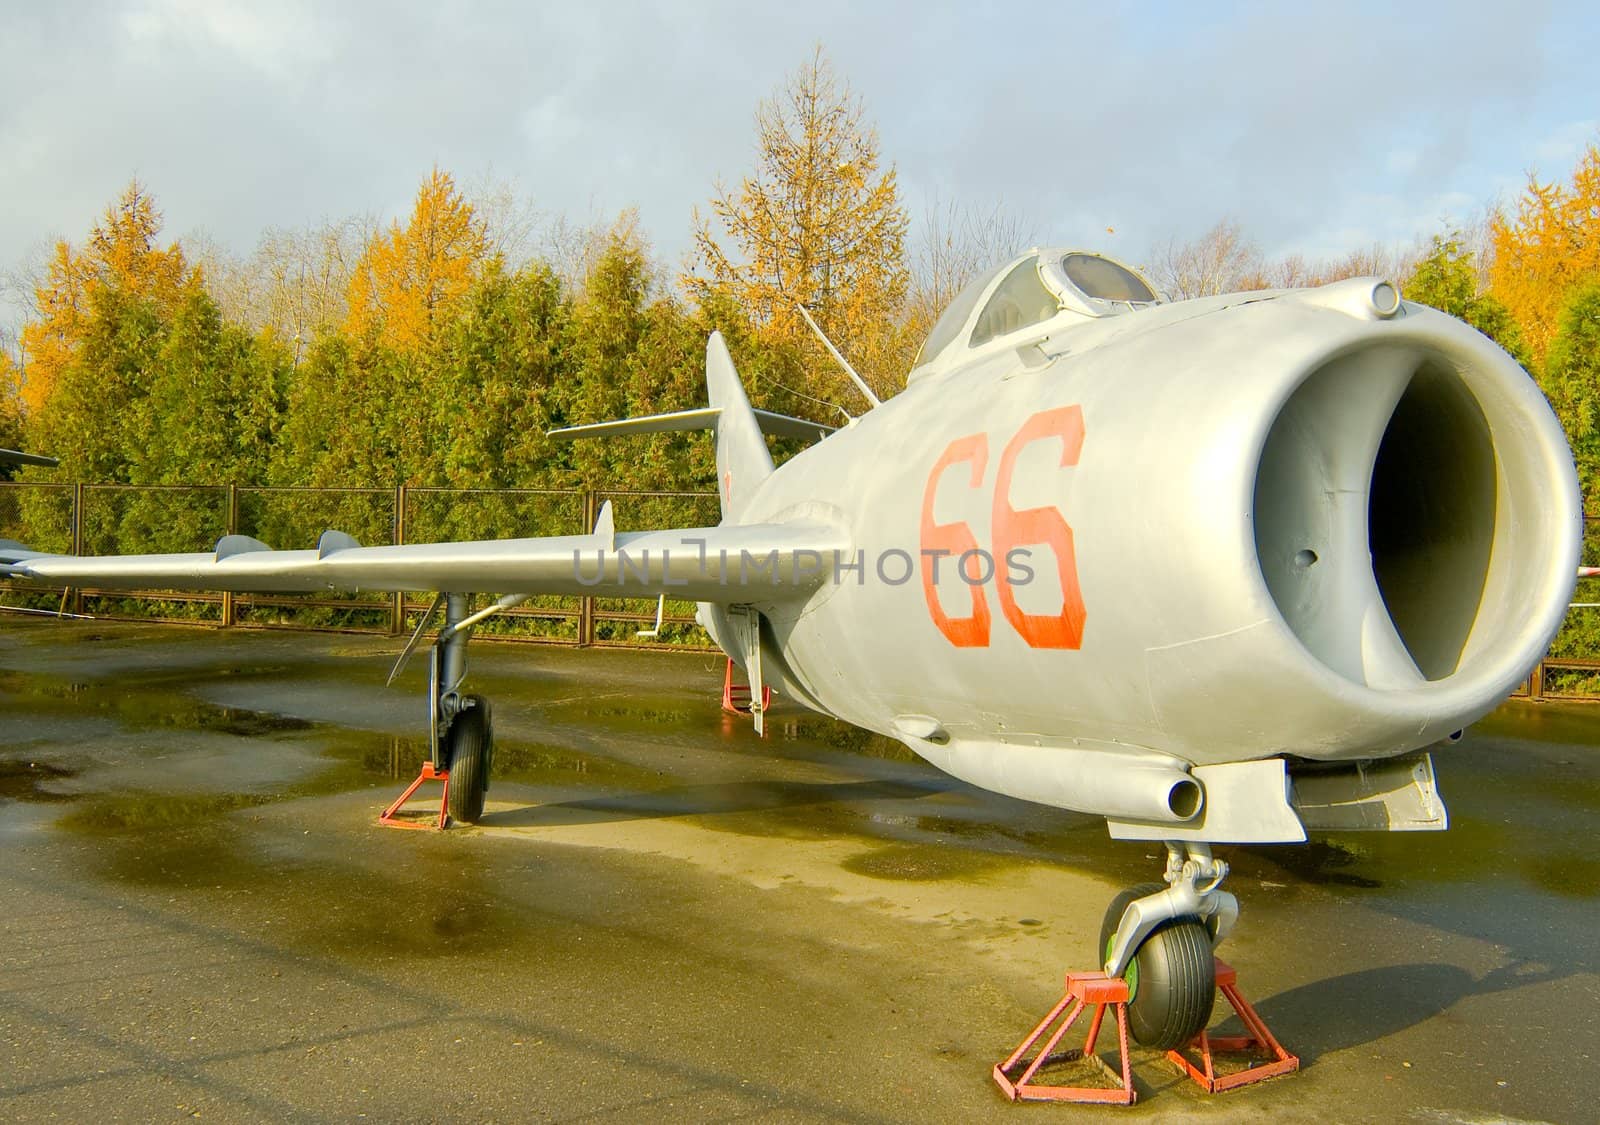 The Plane Was Developed In 1949 In Russia. It output Was 7999 Of Five Modification.